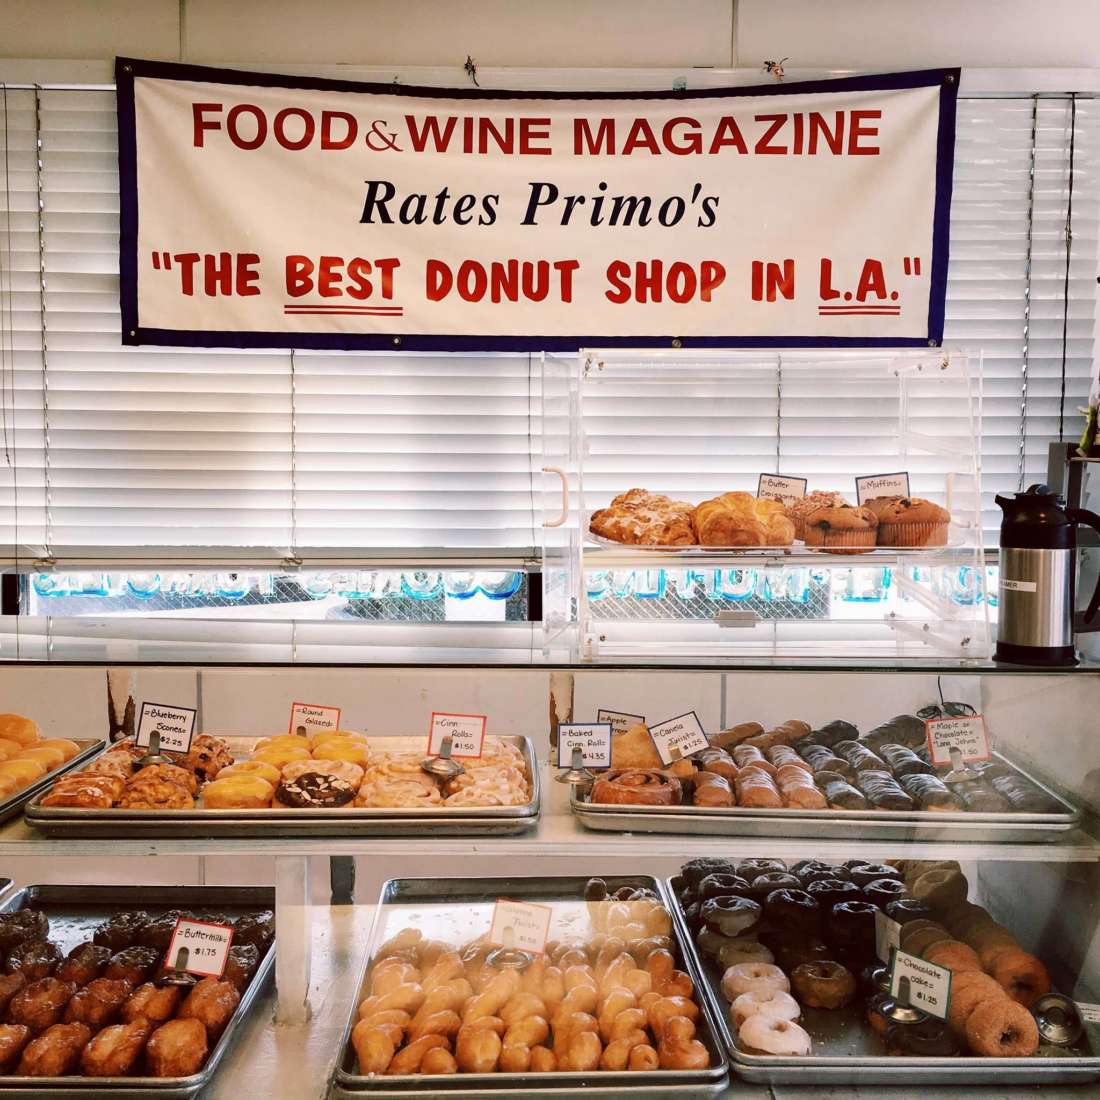 Revisiting first loves. A Los Angeles food story